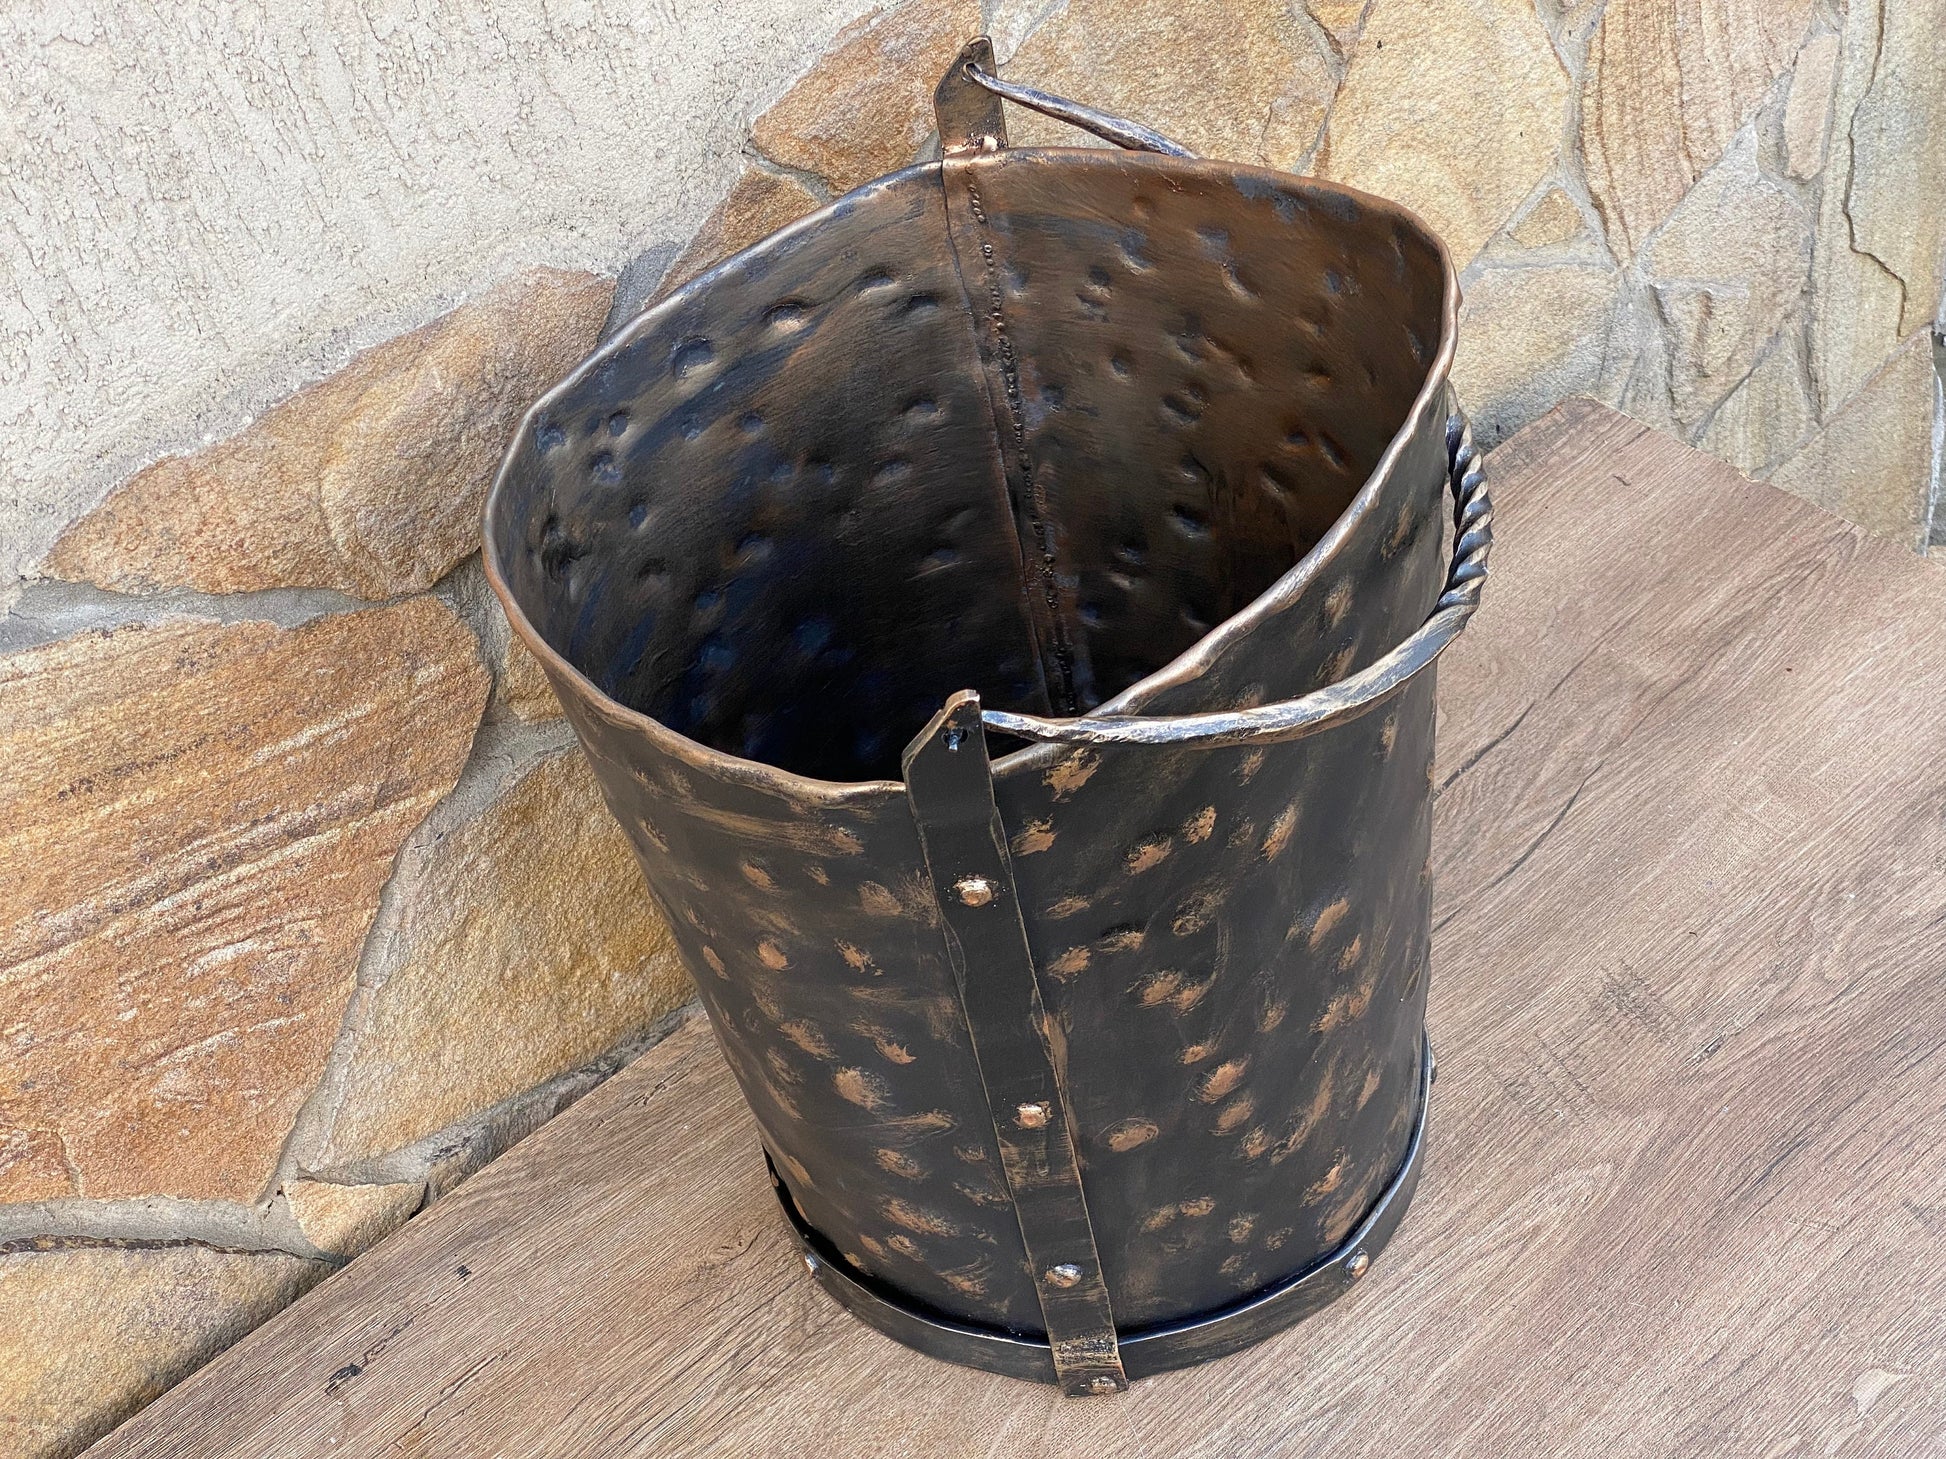 Bucket, ash bucket, firewood holder, birthday, Christmas, fireplace, medieval, iron gift, steel gift, anniversary, BBQ, fire poker,dads gift